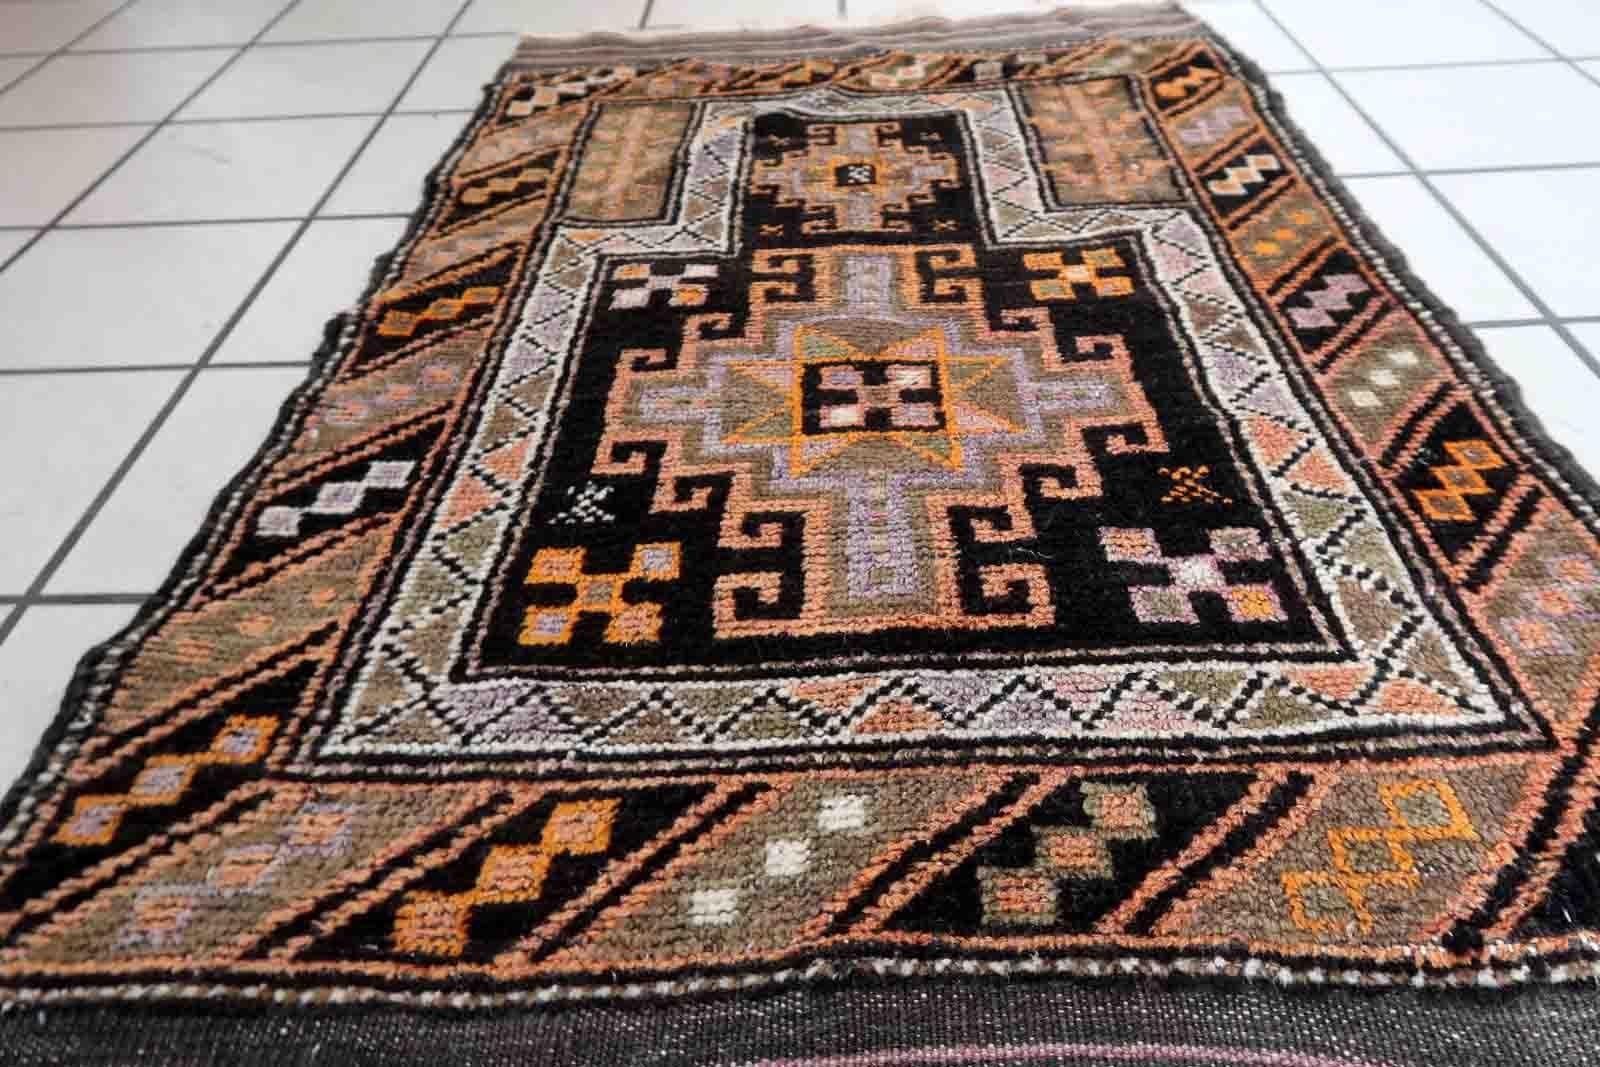 Handmade antique collectible Afghan Baluch rug in tribal prayer design. The rug is from the middle of 20th century in original good condition.

-condition: original good,

-circa: 1900s,

-size: 2.1' x 3.4' (66cm x 104cm),

-material: